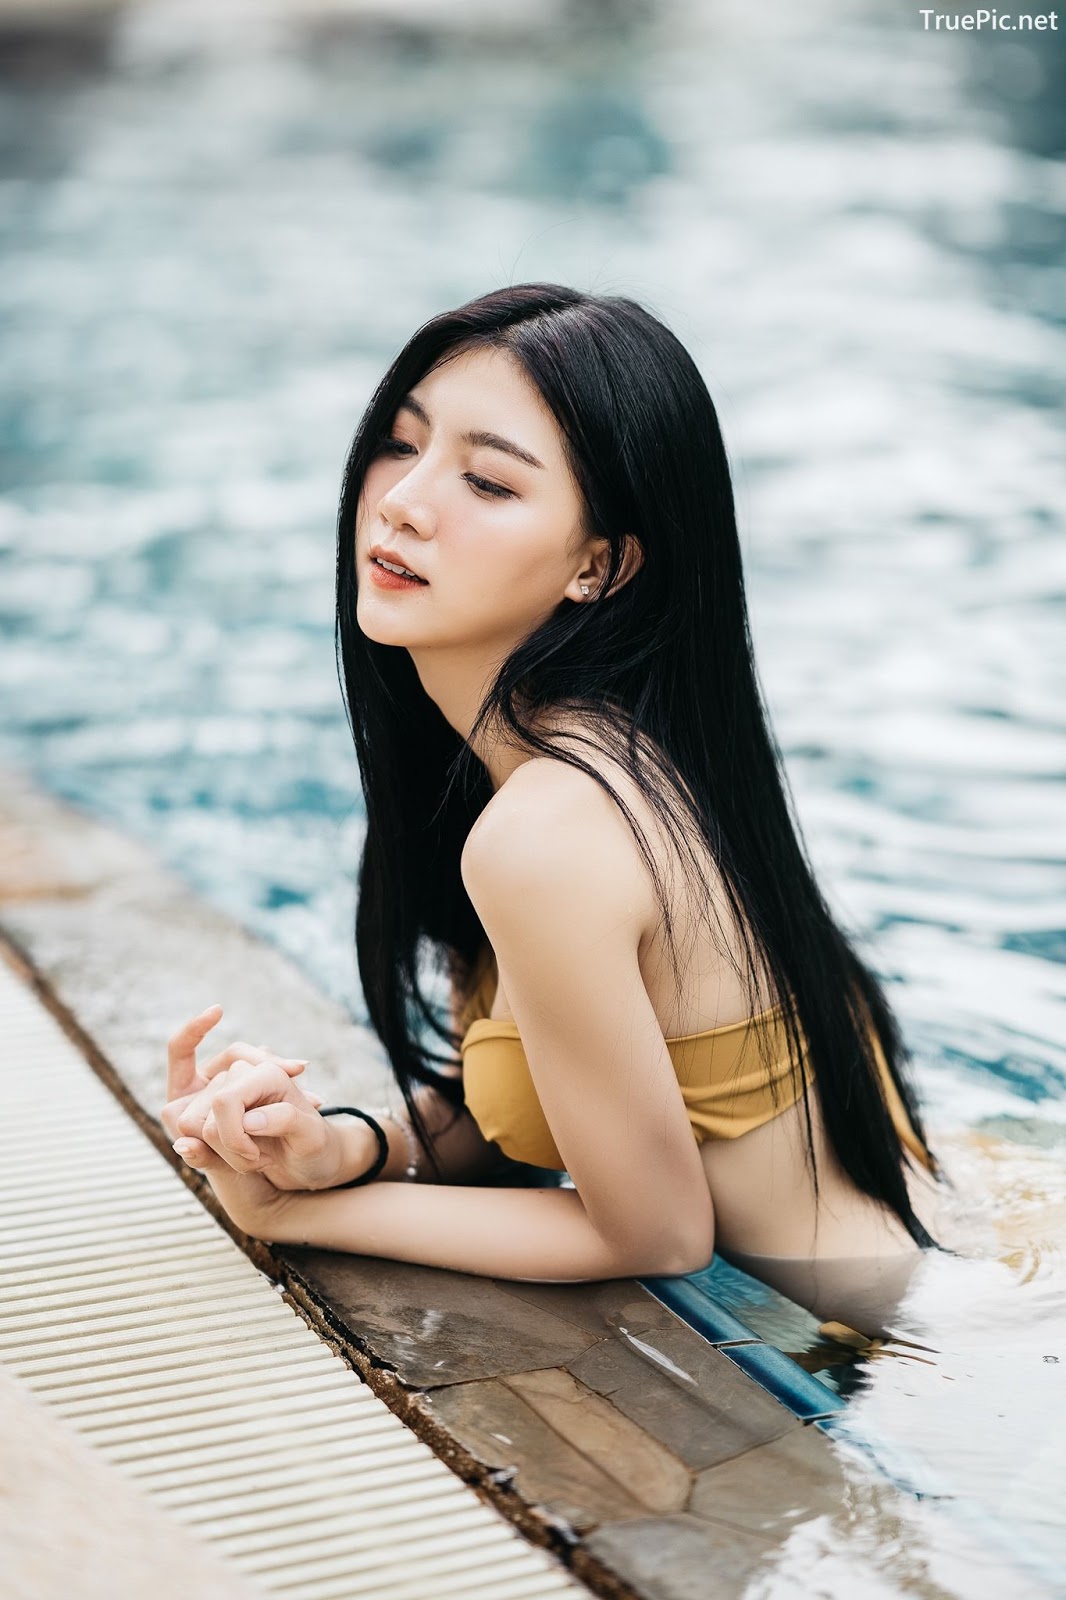 Image Thailand Model - Sasi Ngiunwan - Let’s Summer Chilling - TruePic.net - Picture-36